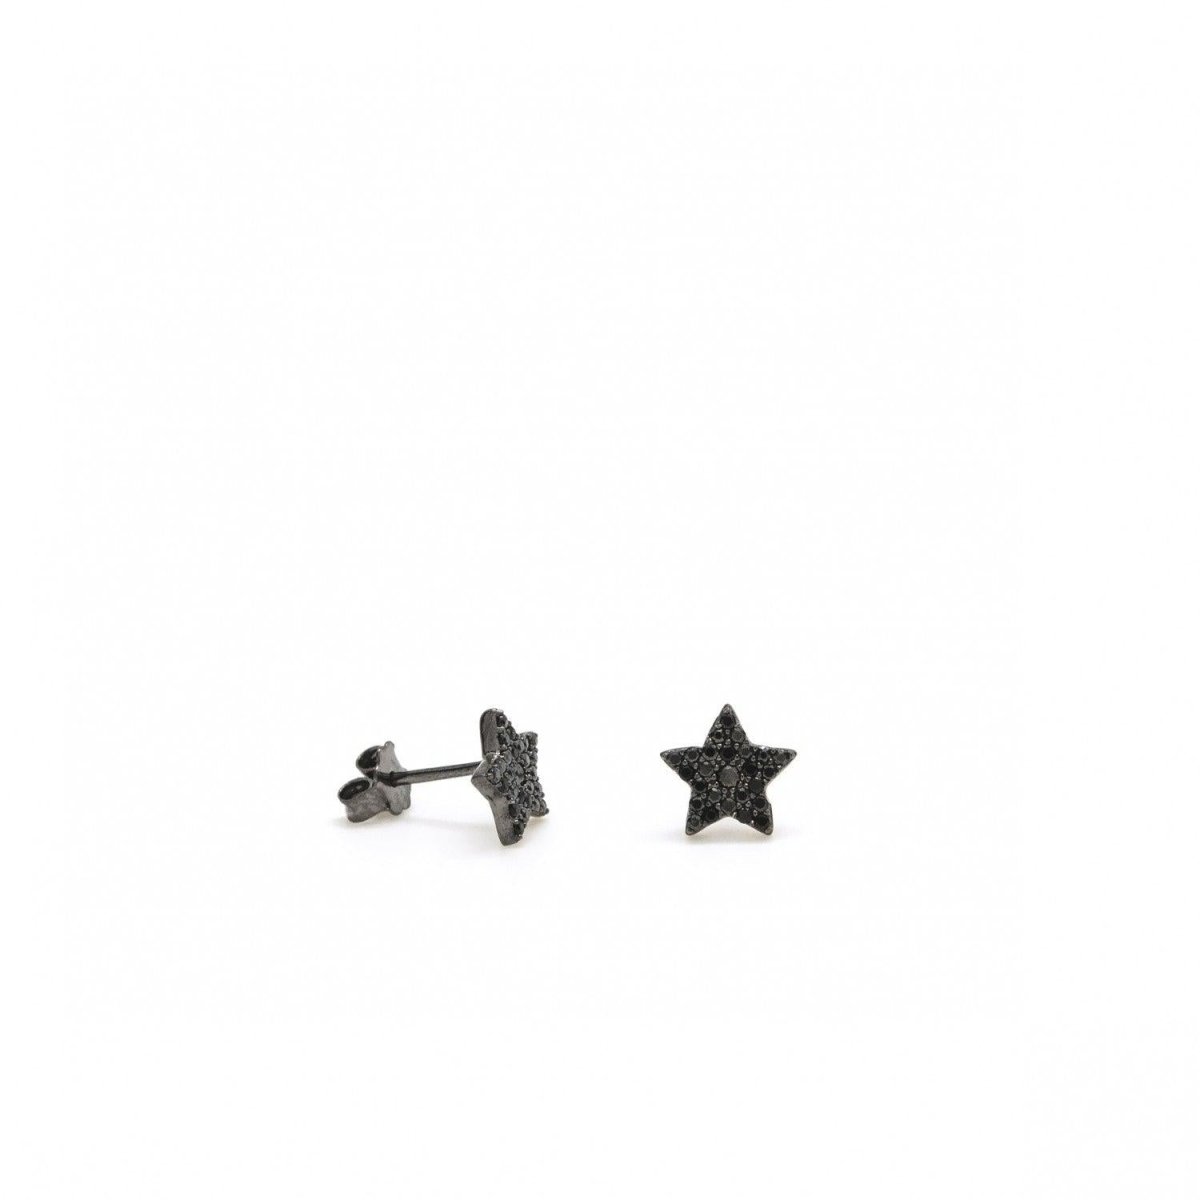 Earrings - Small shiny earrings with star motif and ruthenium plating